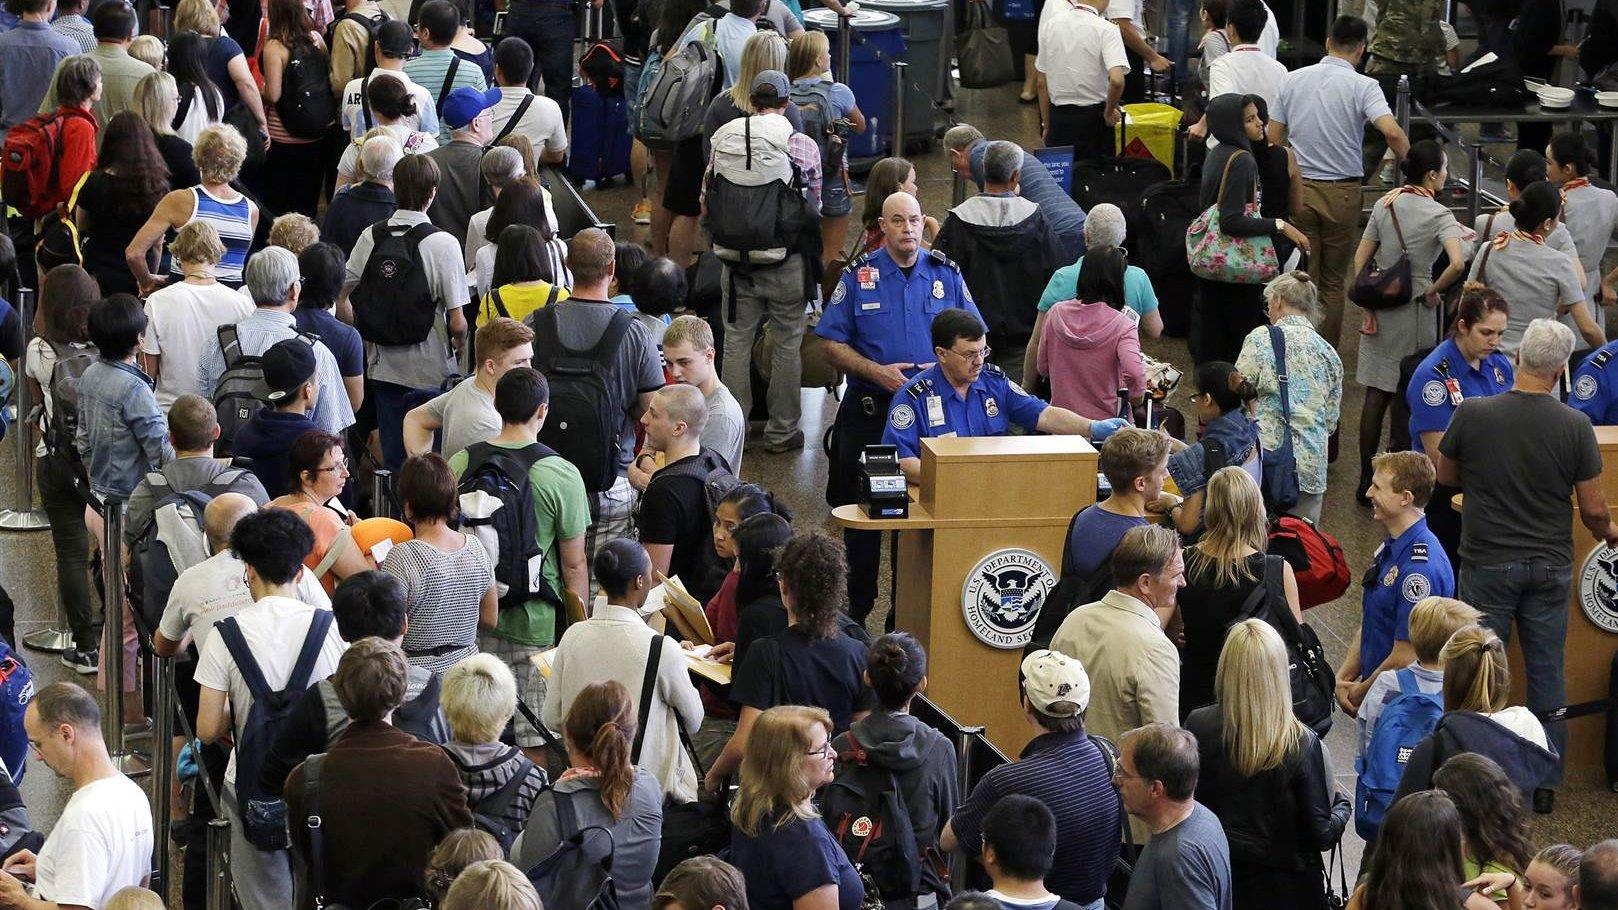 TSA security chief under fire over long security lines 